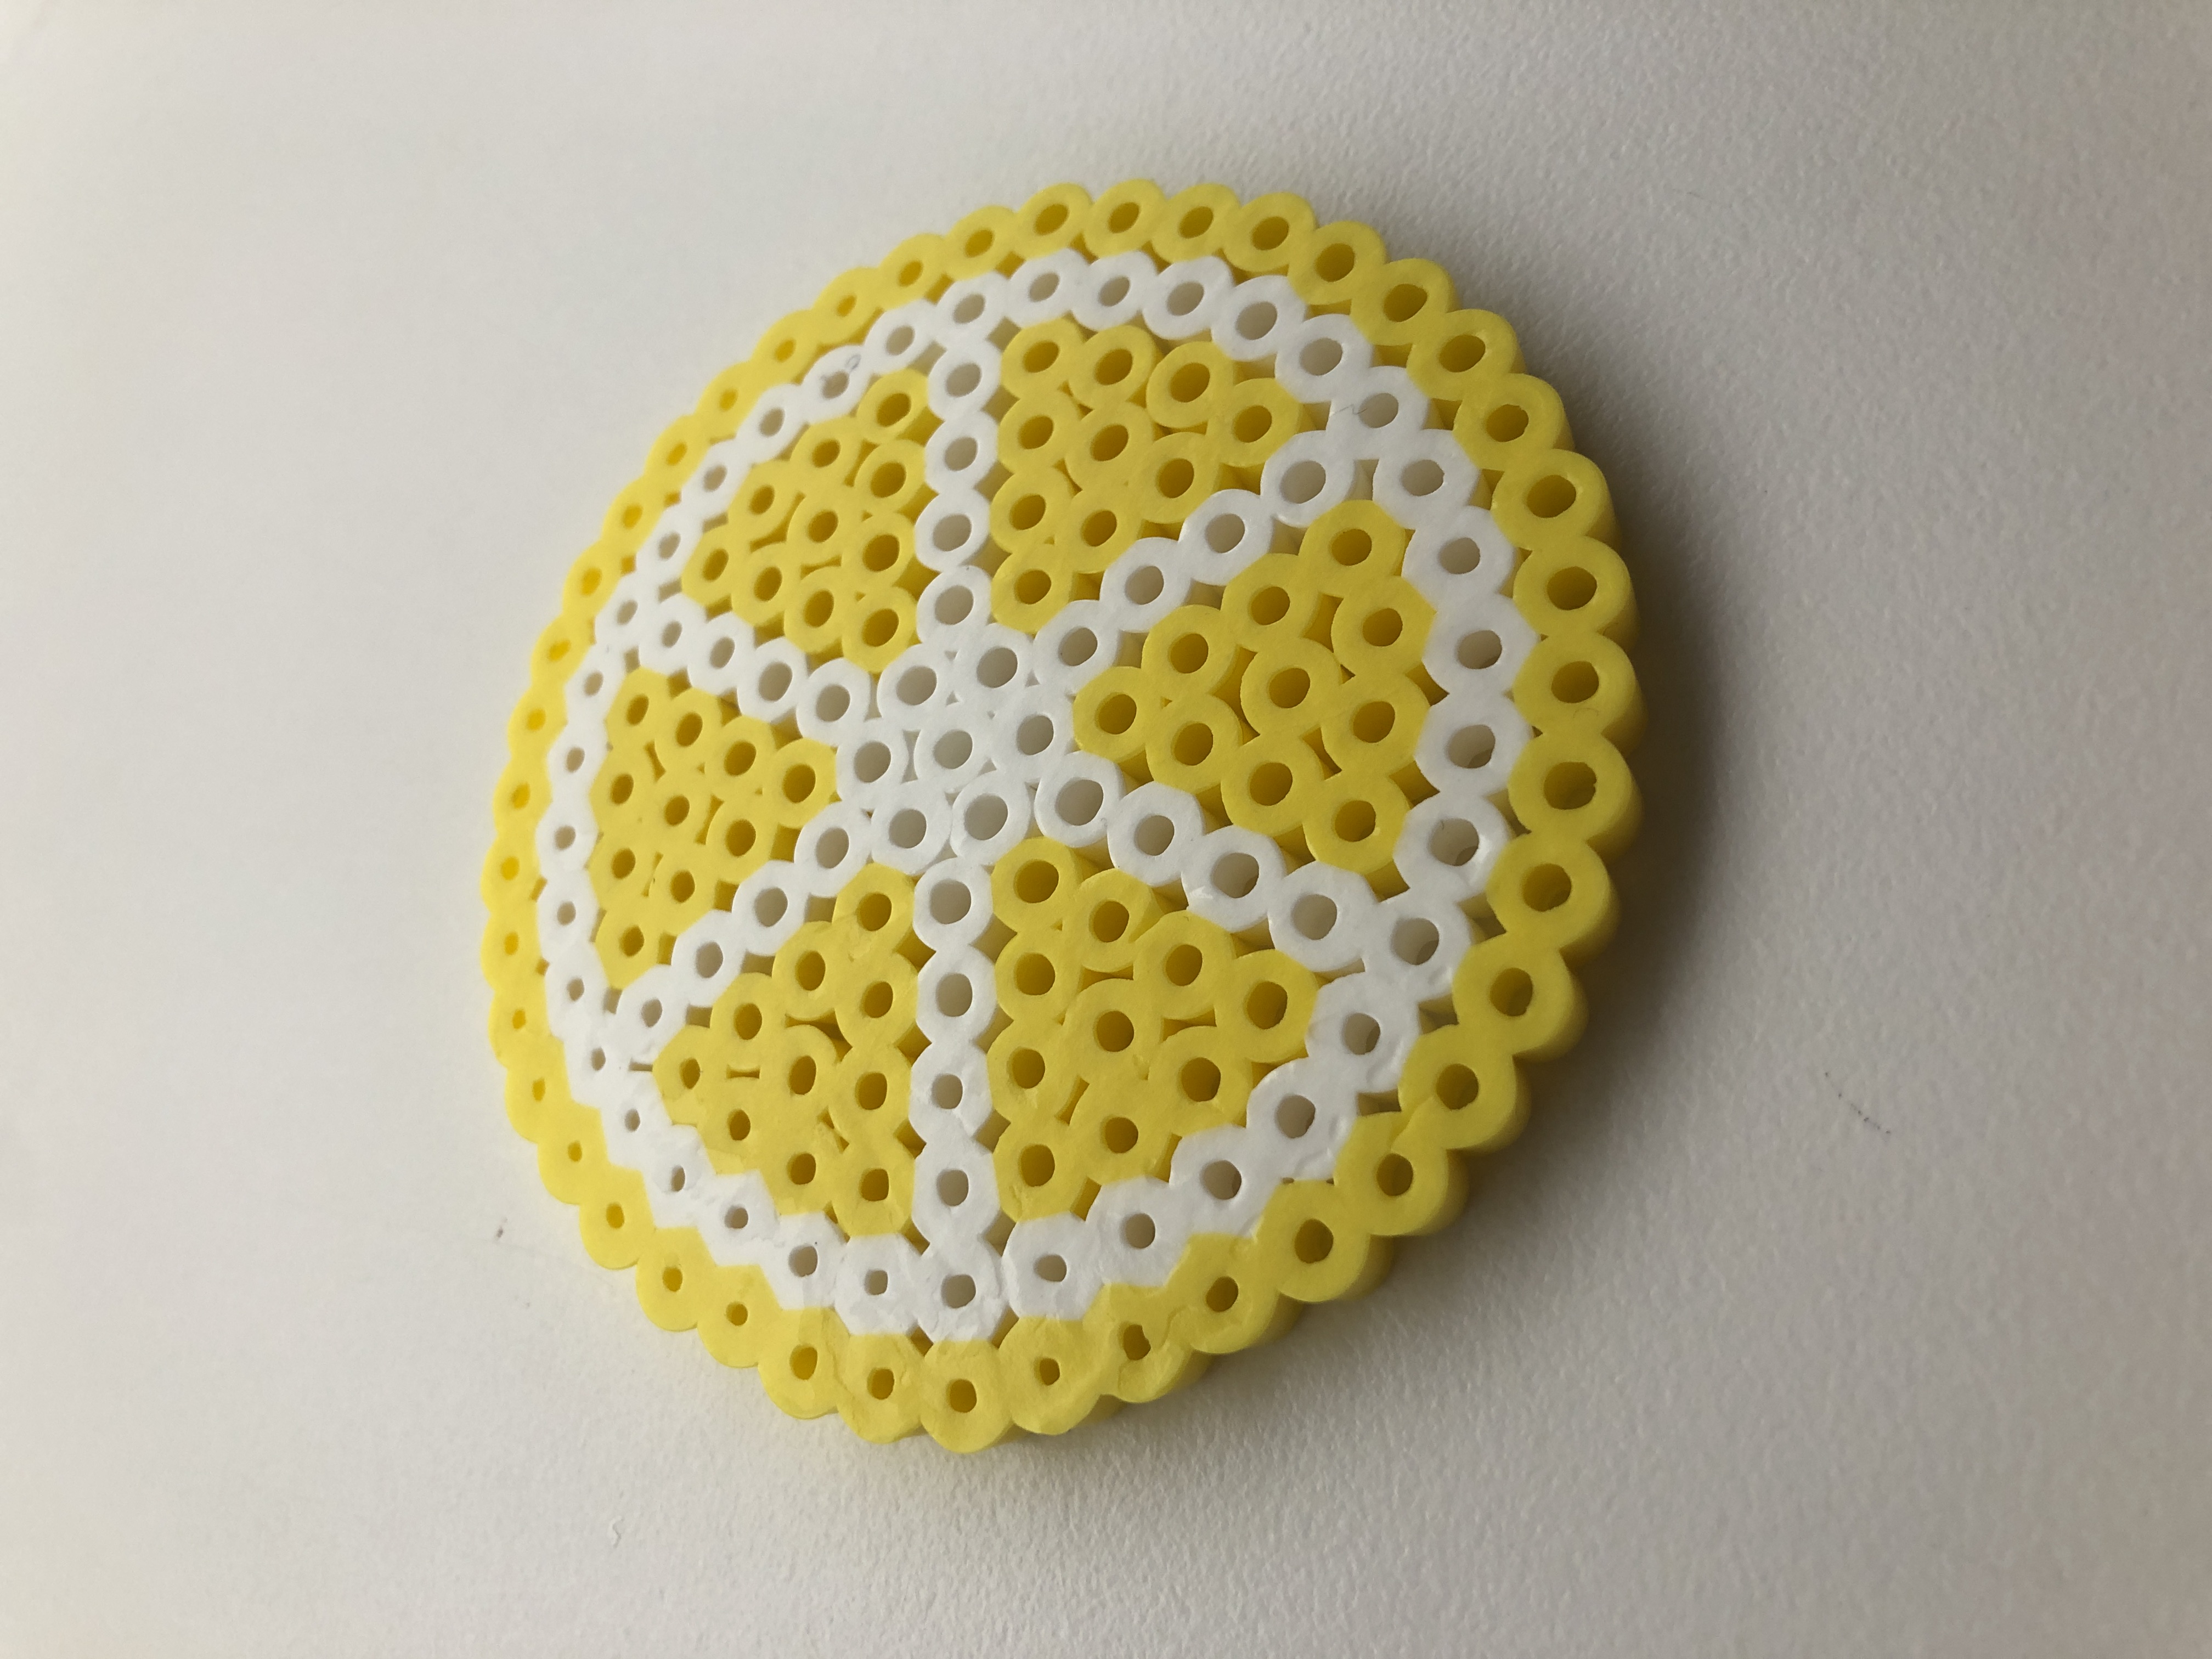 a flat circle made out of beads that looks like a lemon